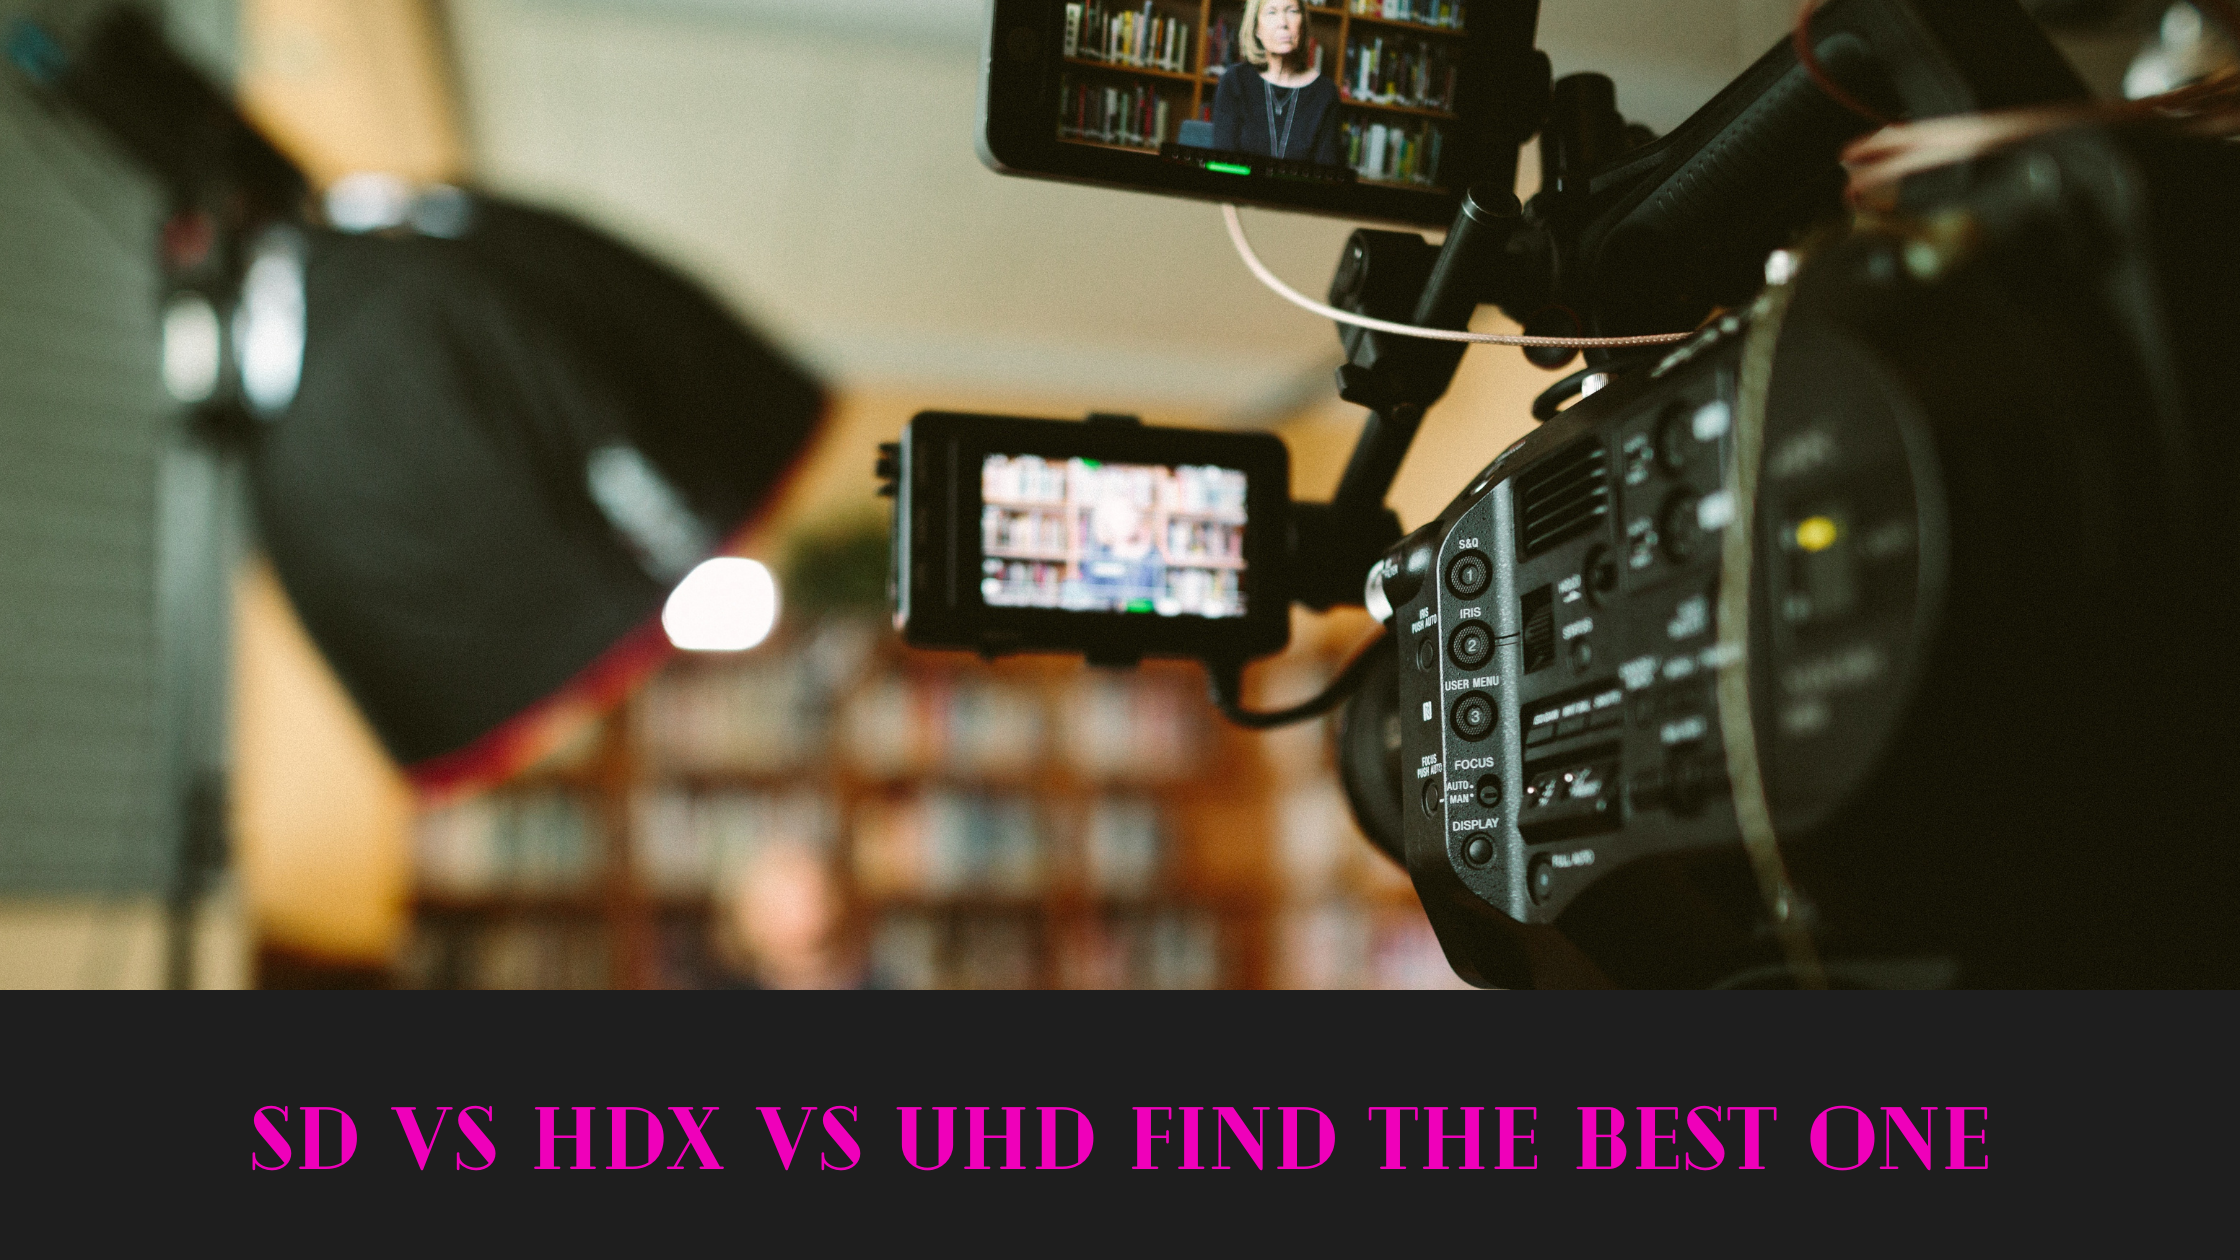 SD vs HDX vs UHD Find the Best One